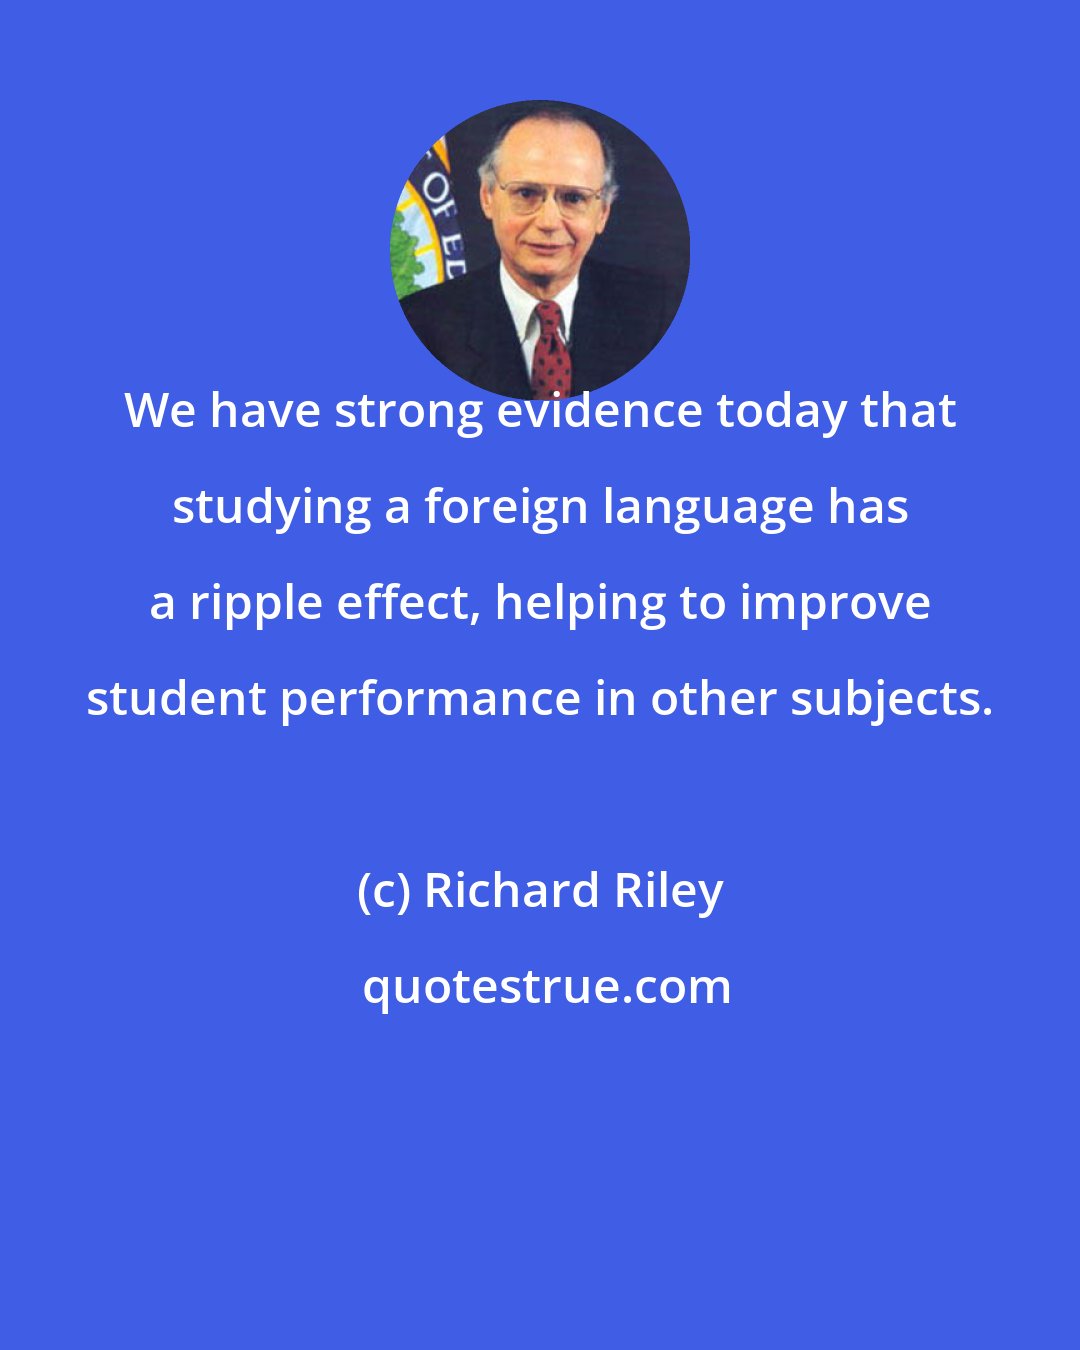 Richard Riley: We have strong evidence today that studying a foreign language has a ripple effect, helping to improve student performance in other subjects.